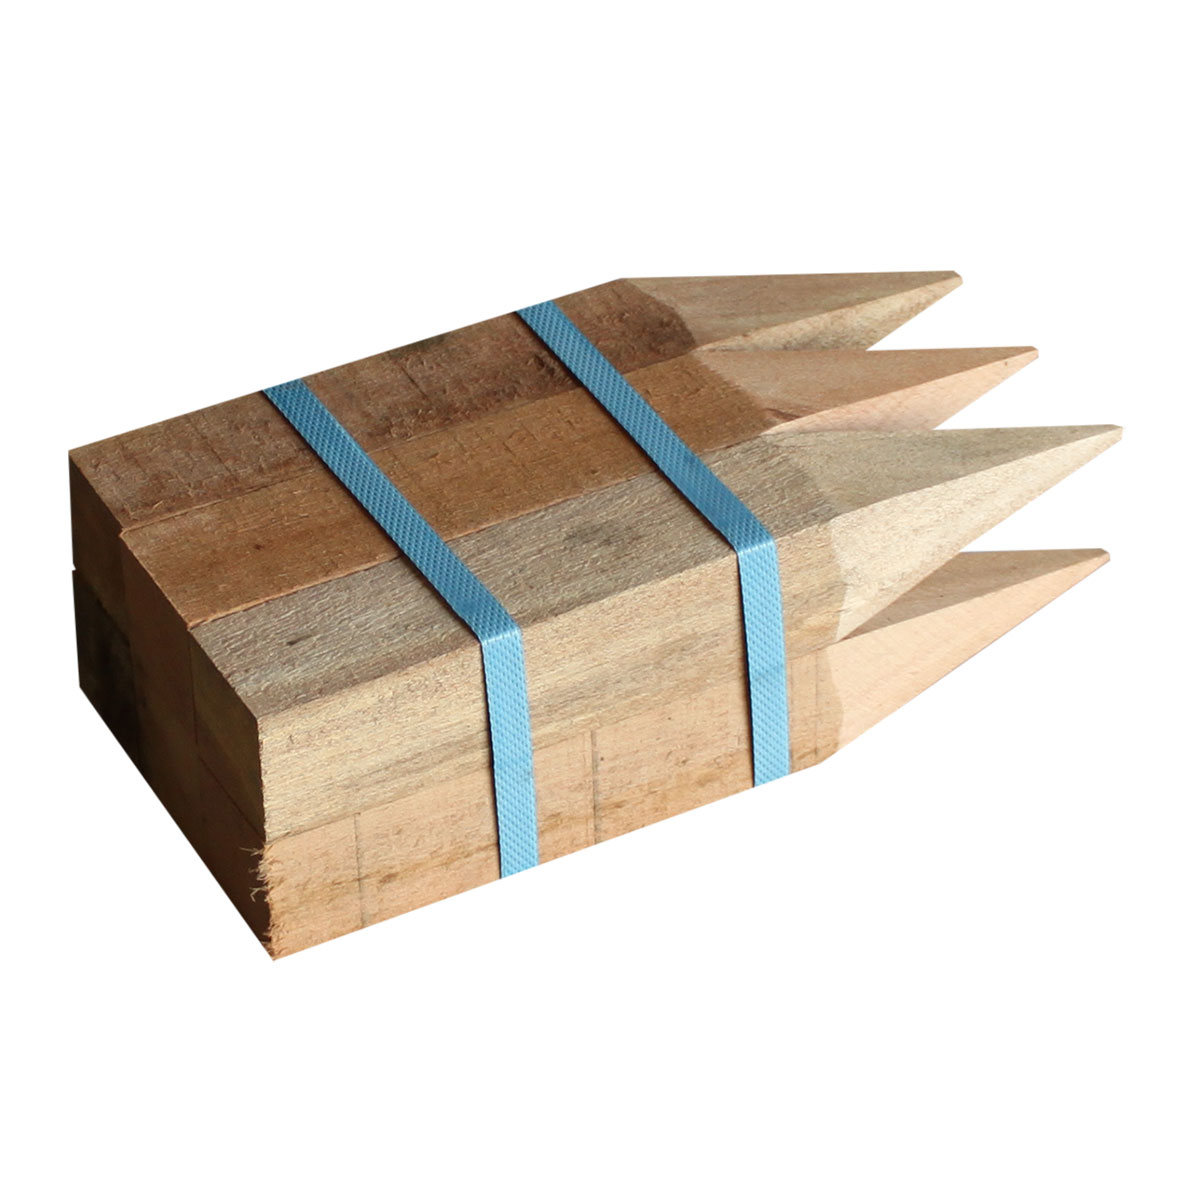 Hardwood Stakes 50 x 50 x 300mm - 6 Pack